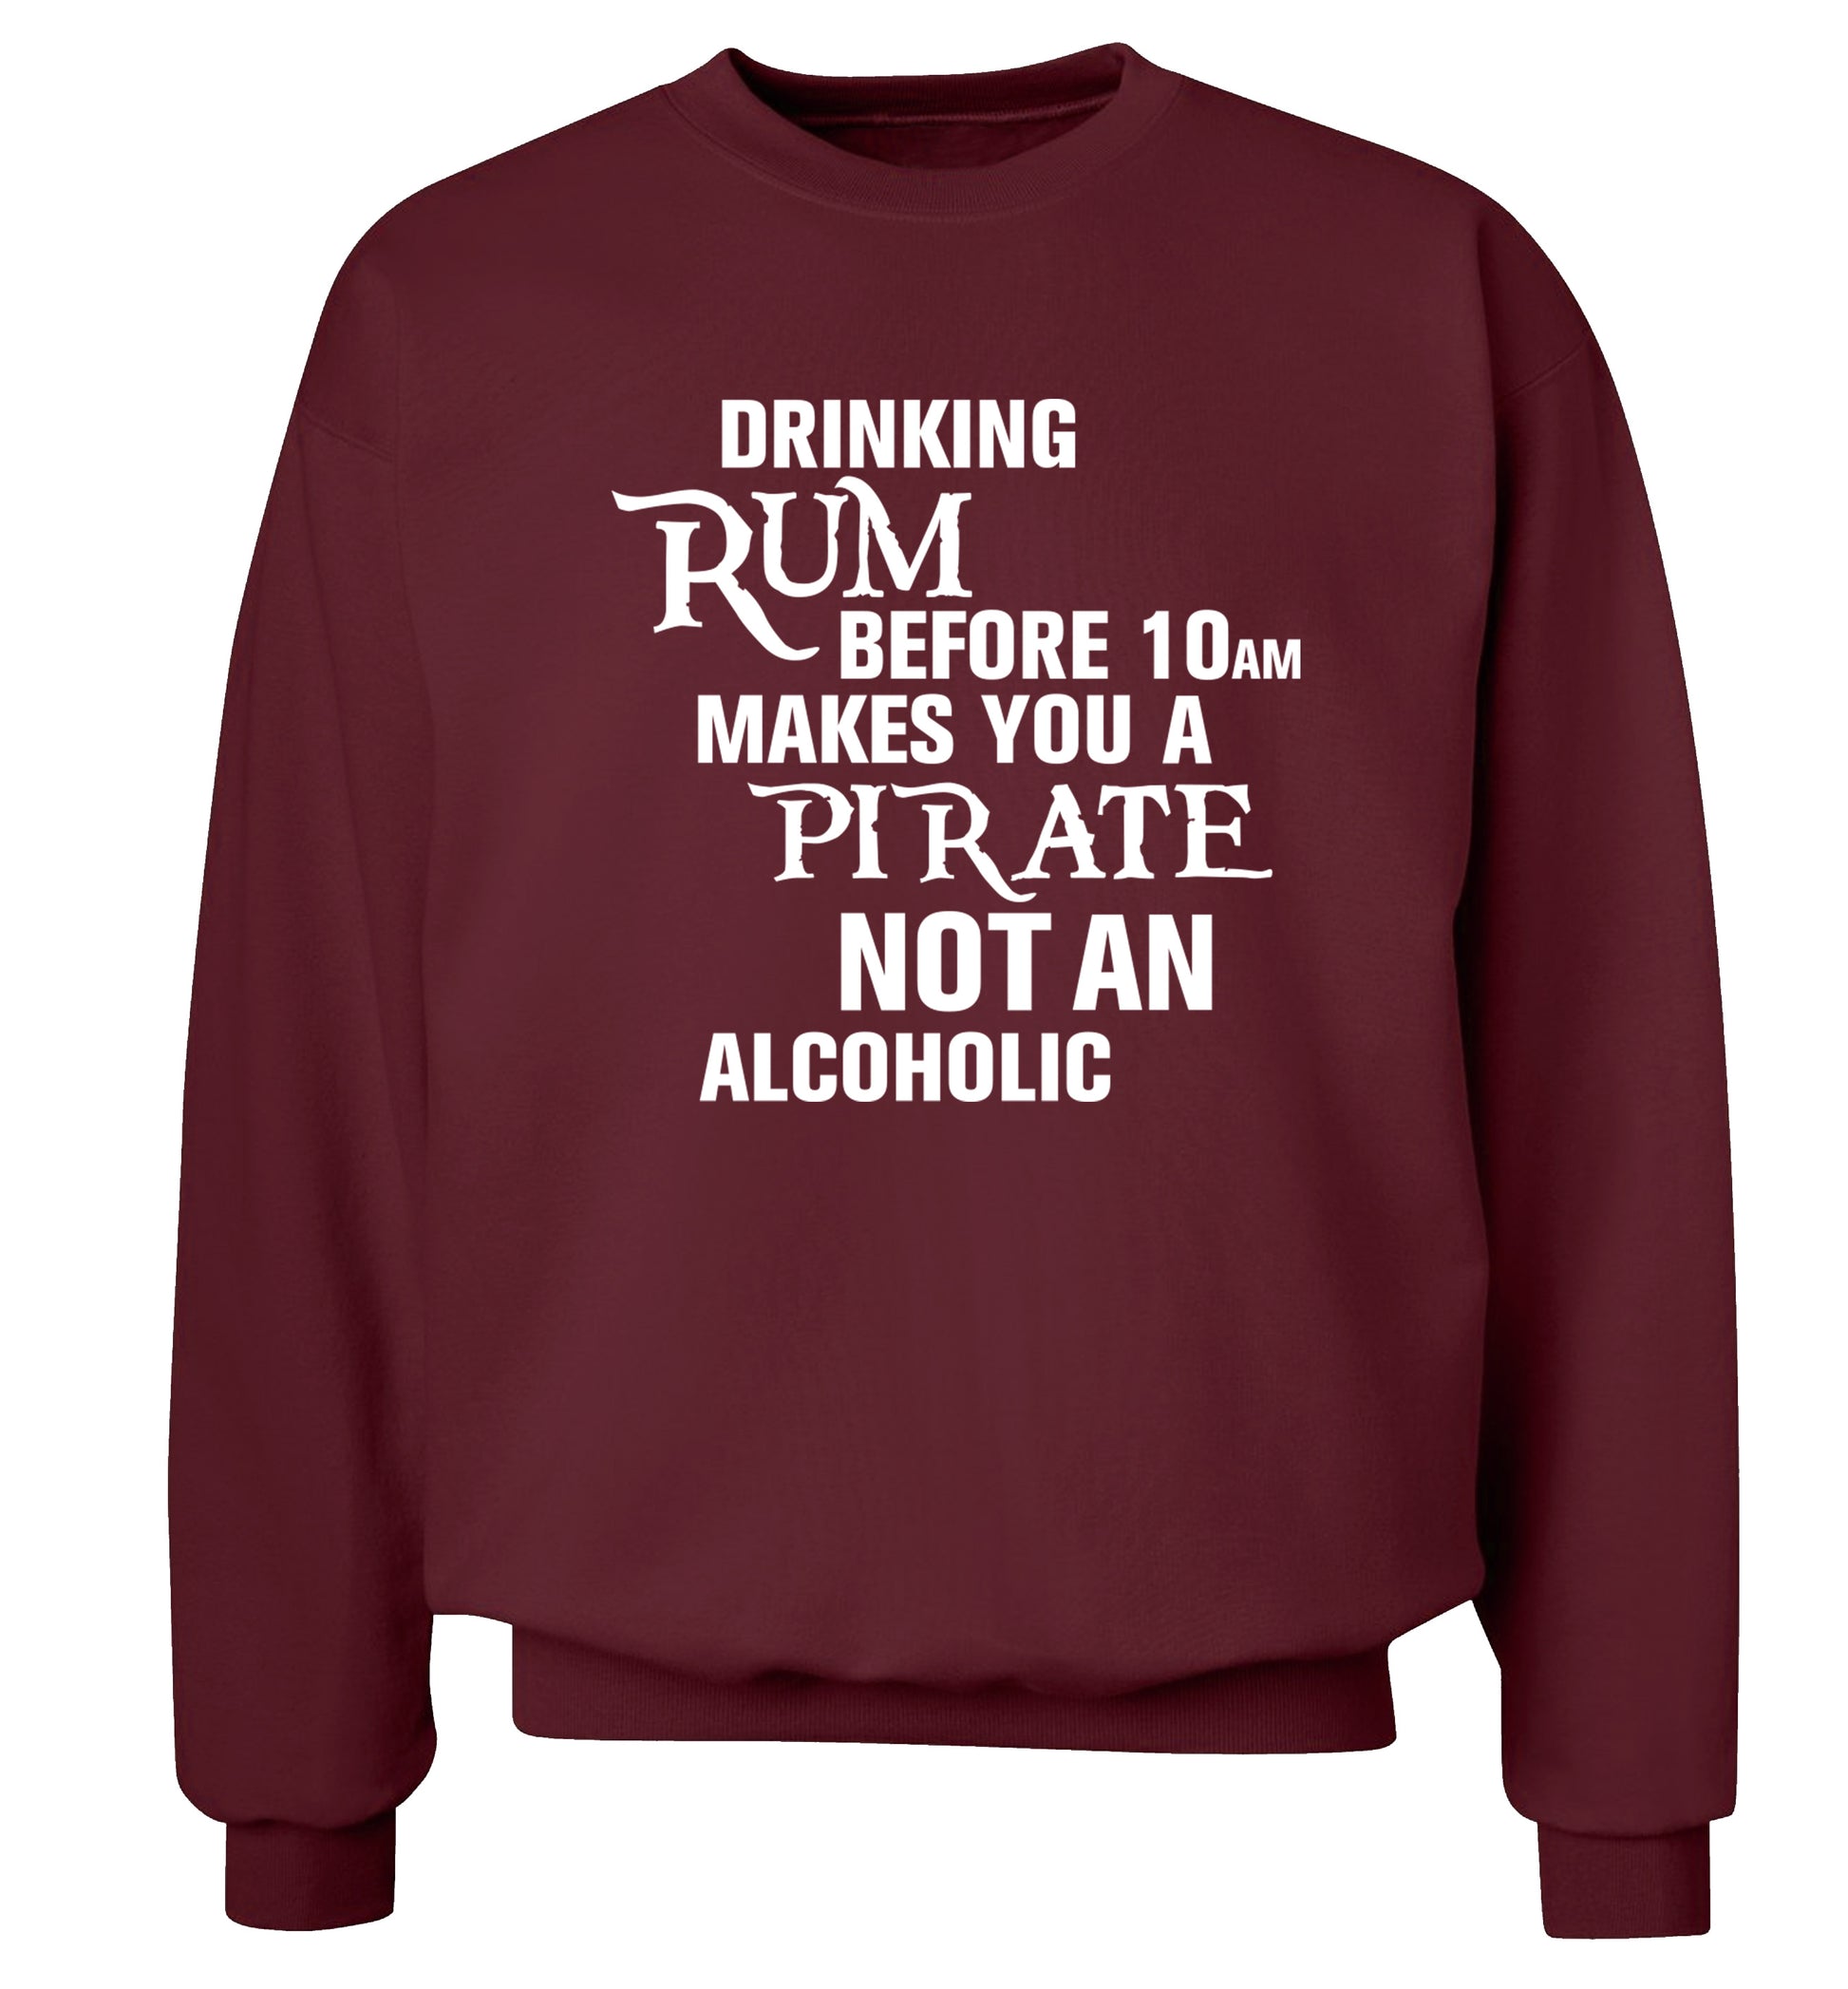 Drinking rum before 10AM makes you a pirate not an alcoholic Adult's unisex maroon Sweater 2XL